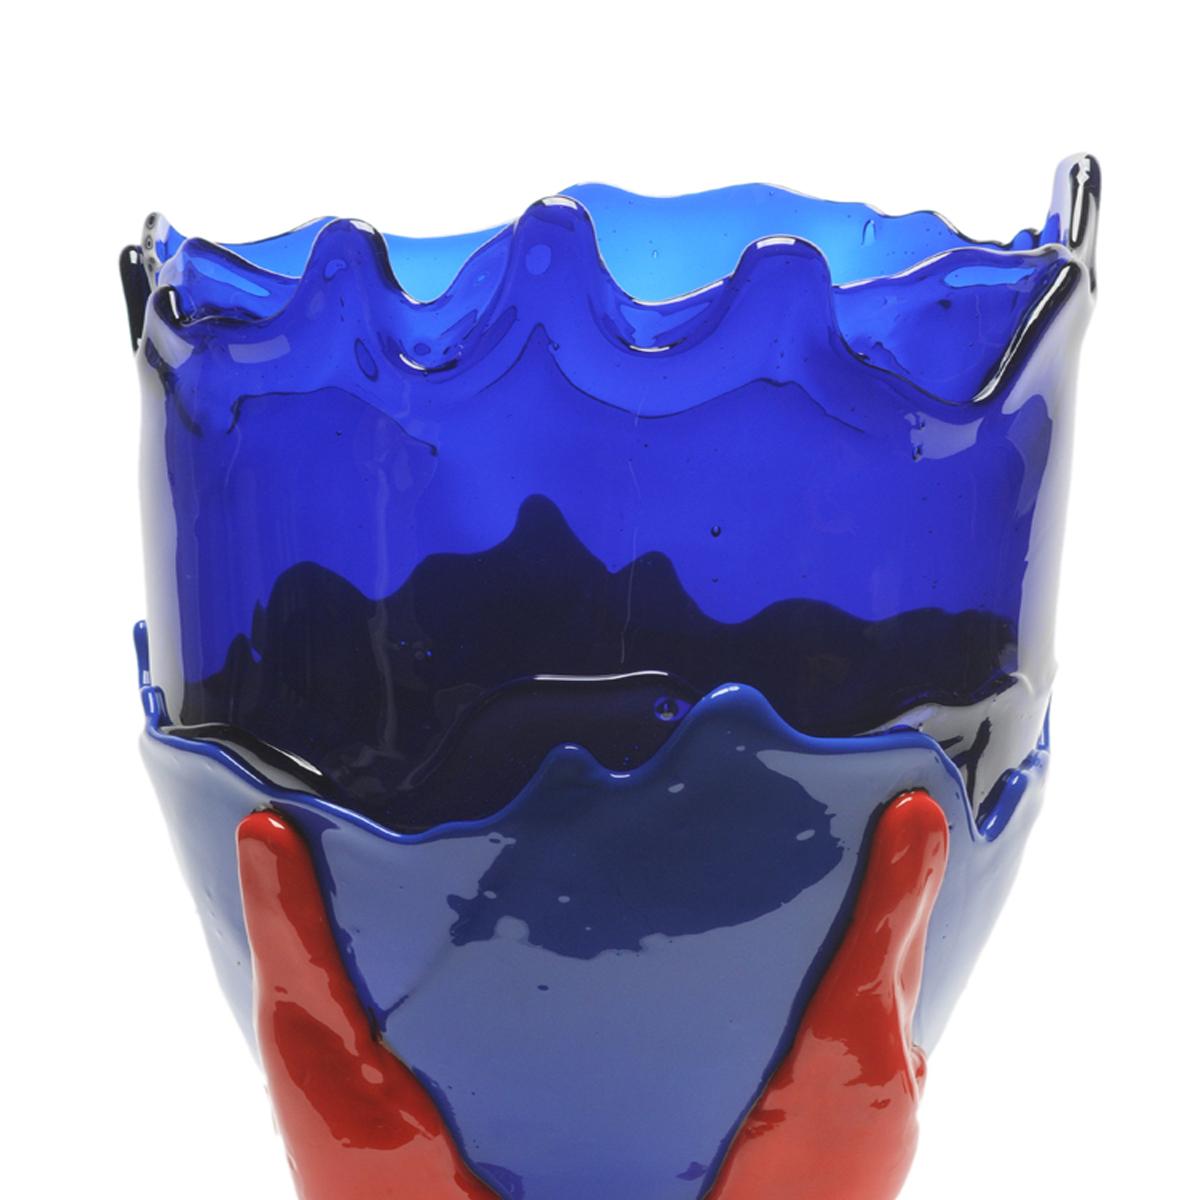 Clear extra colour vase - clear blue Klein, matt blue, matt red.

Vase in soft resin designed by Gaetano Pesce in 1995 for Fish Design collection.

Measures: XL - Ø 30cm x H 56cm
Other sizes available.
Vase in soft resin designed by Gaetano